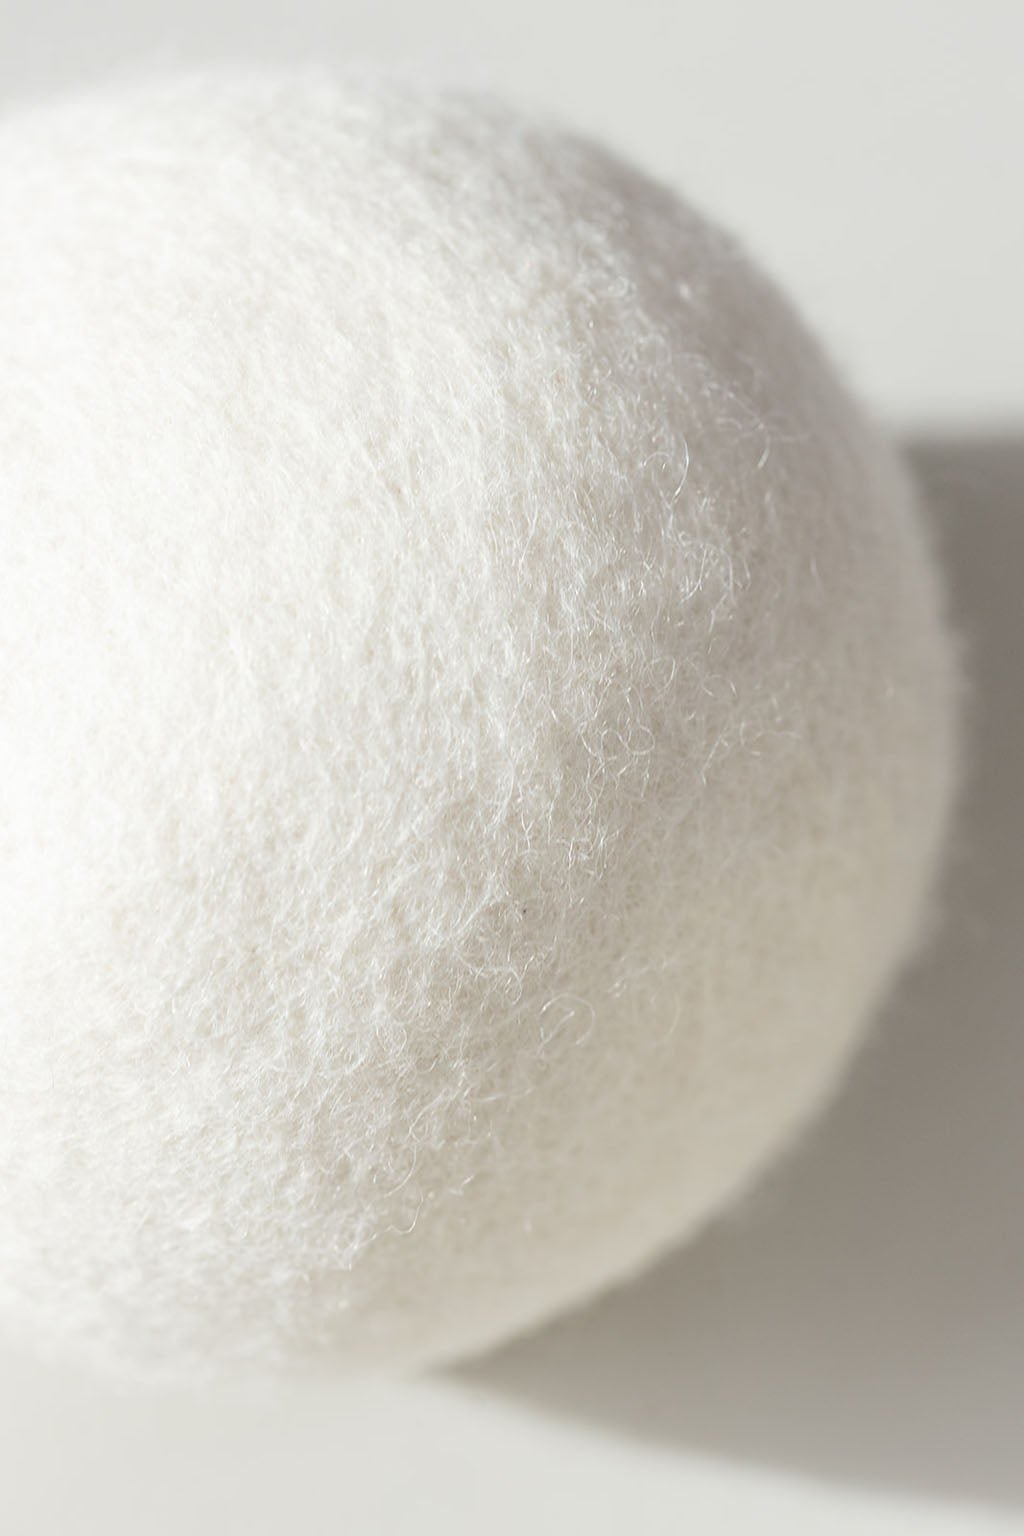 Close up of a single wool dryer ball resting on a white background.